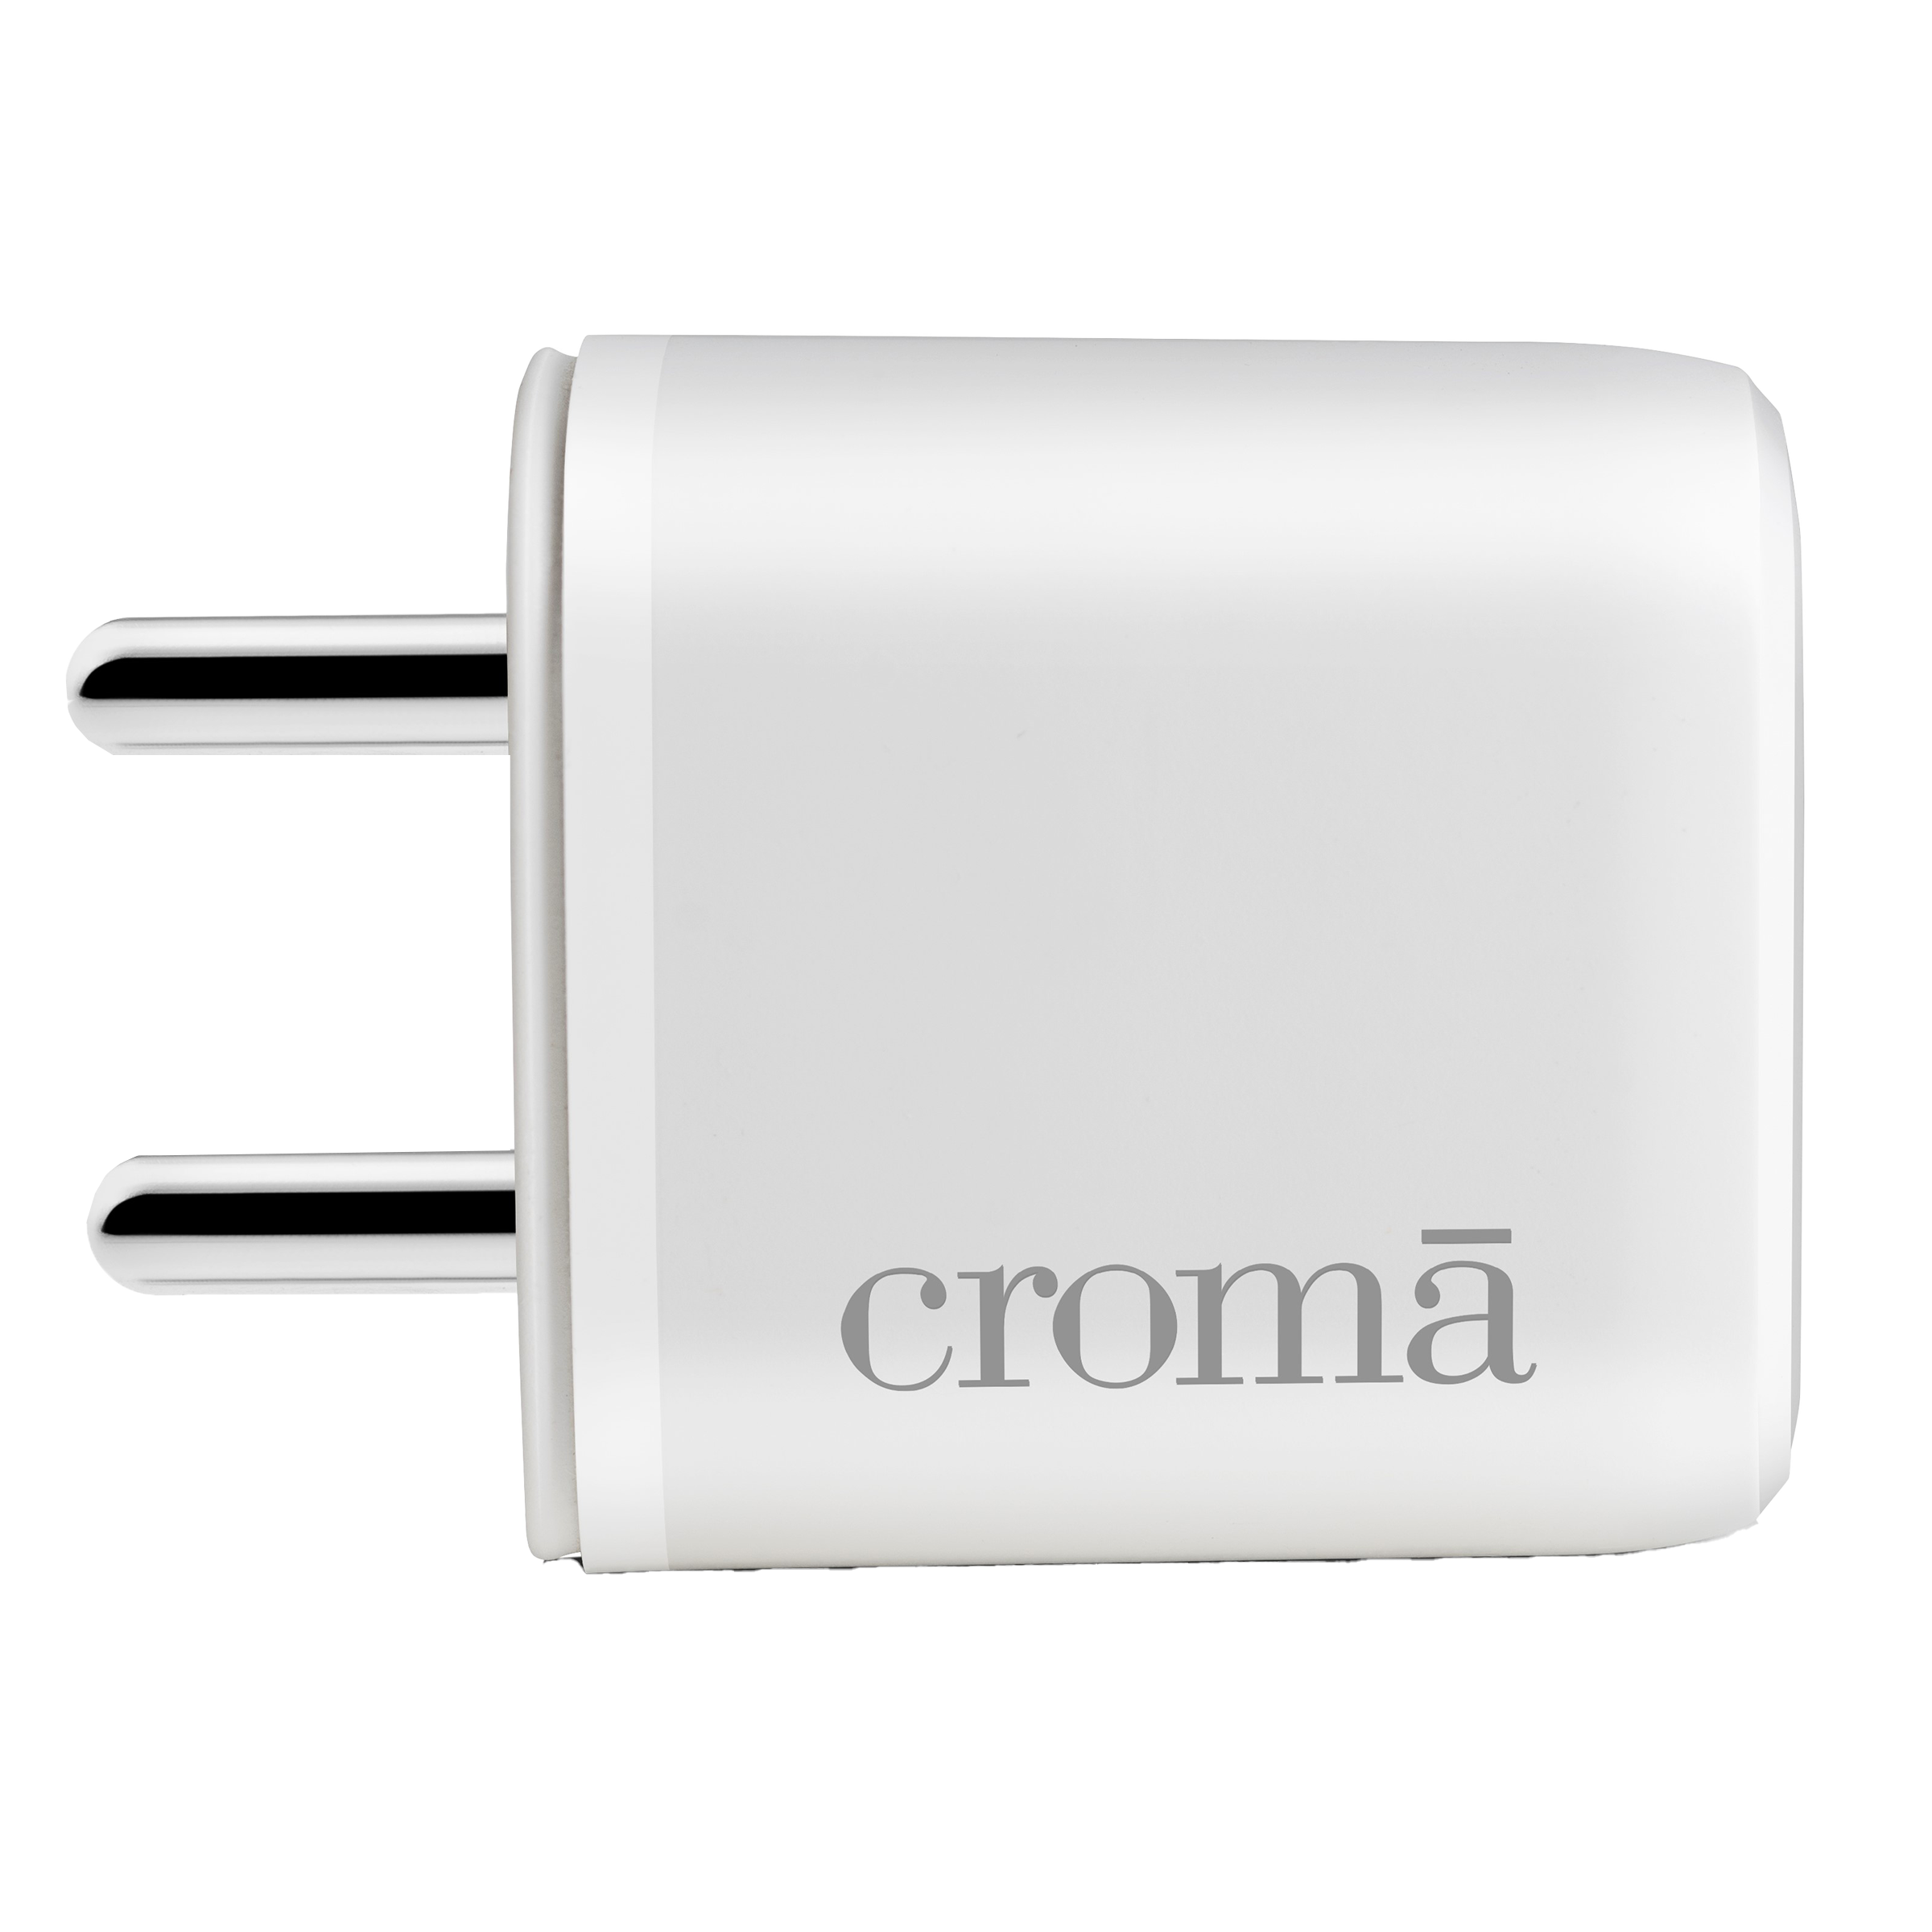 Croma 20 Watts/3.1 Amps 2-Port USB and Type-C Wall Charging Adapter (Power Delivery, CRCA2307, White)_1